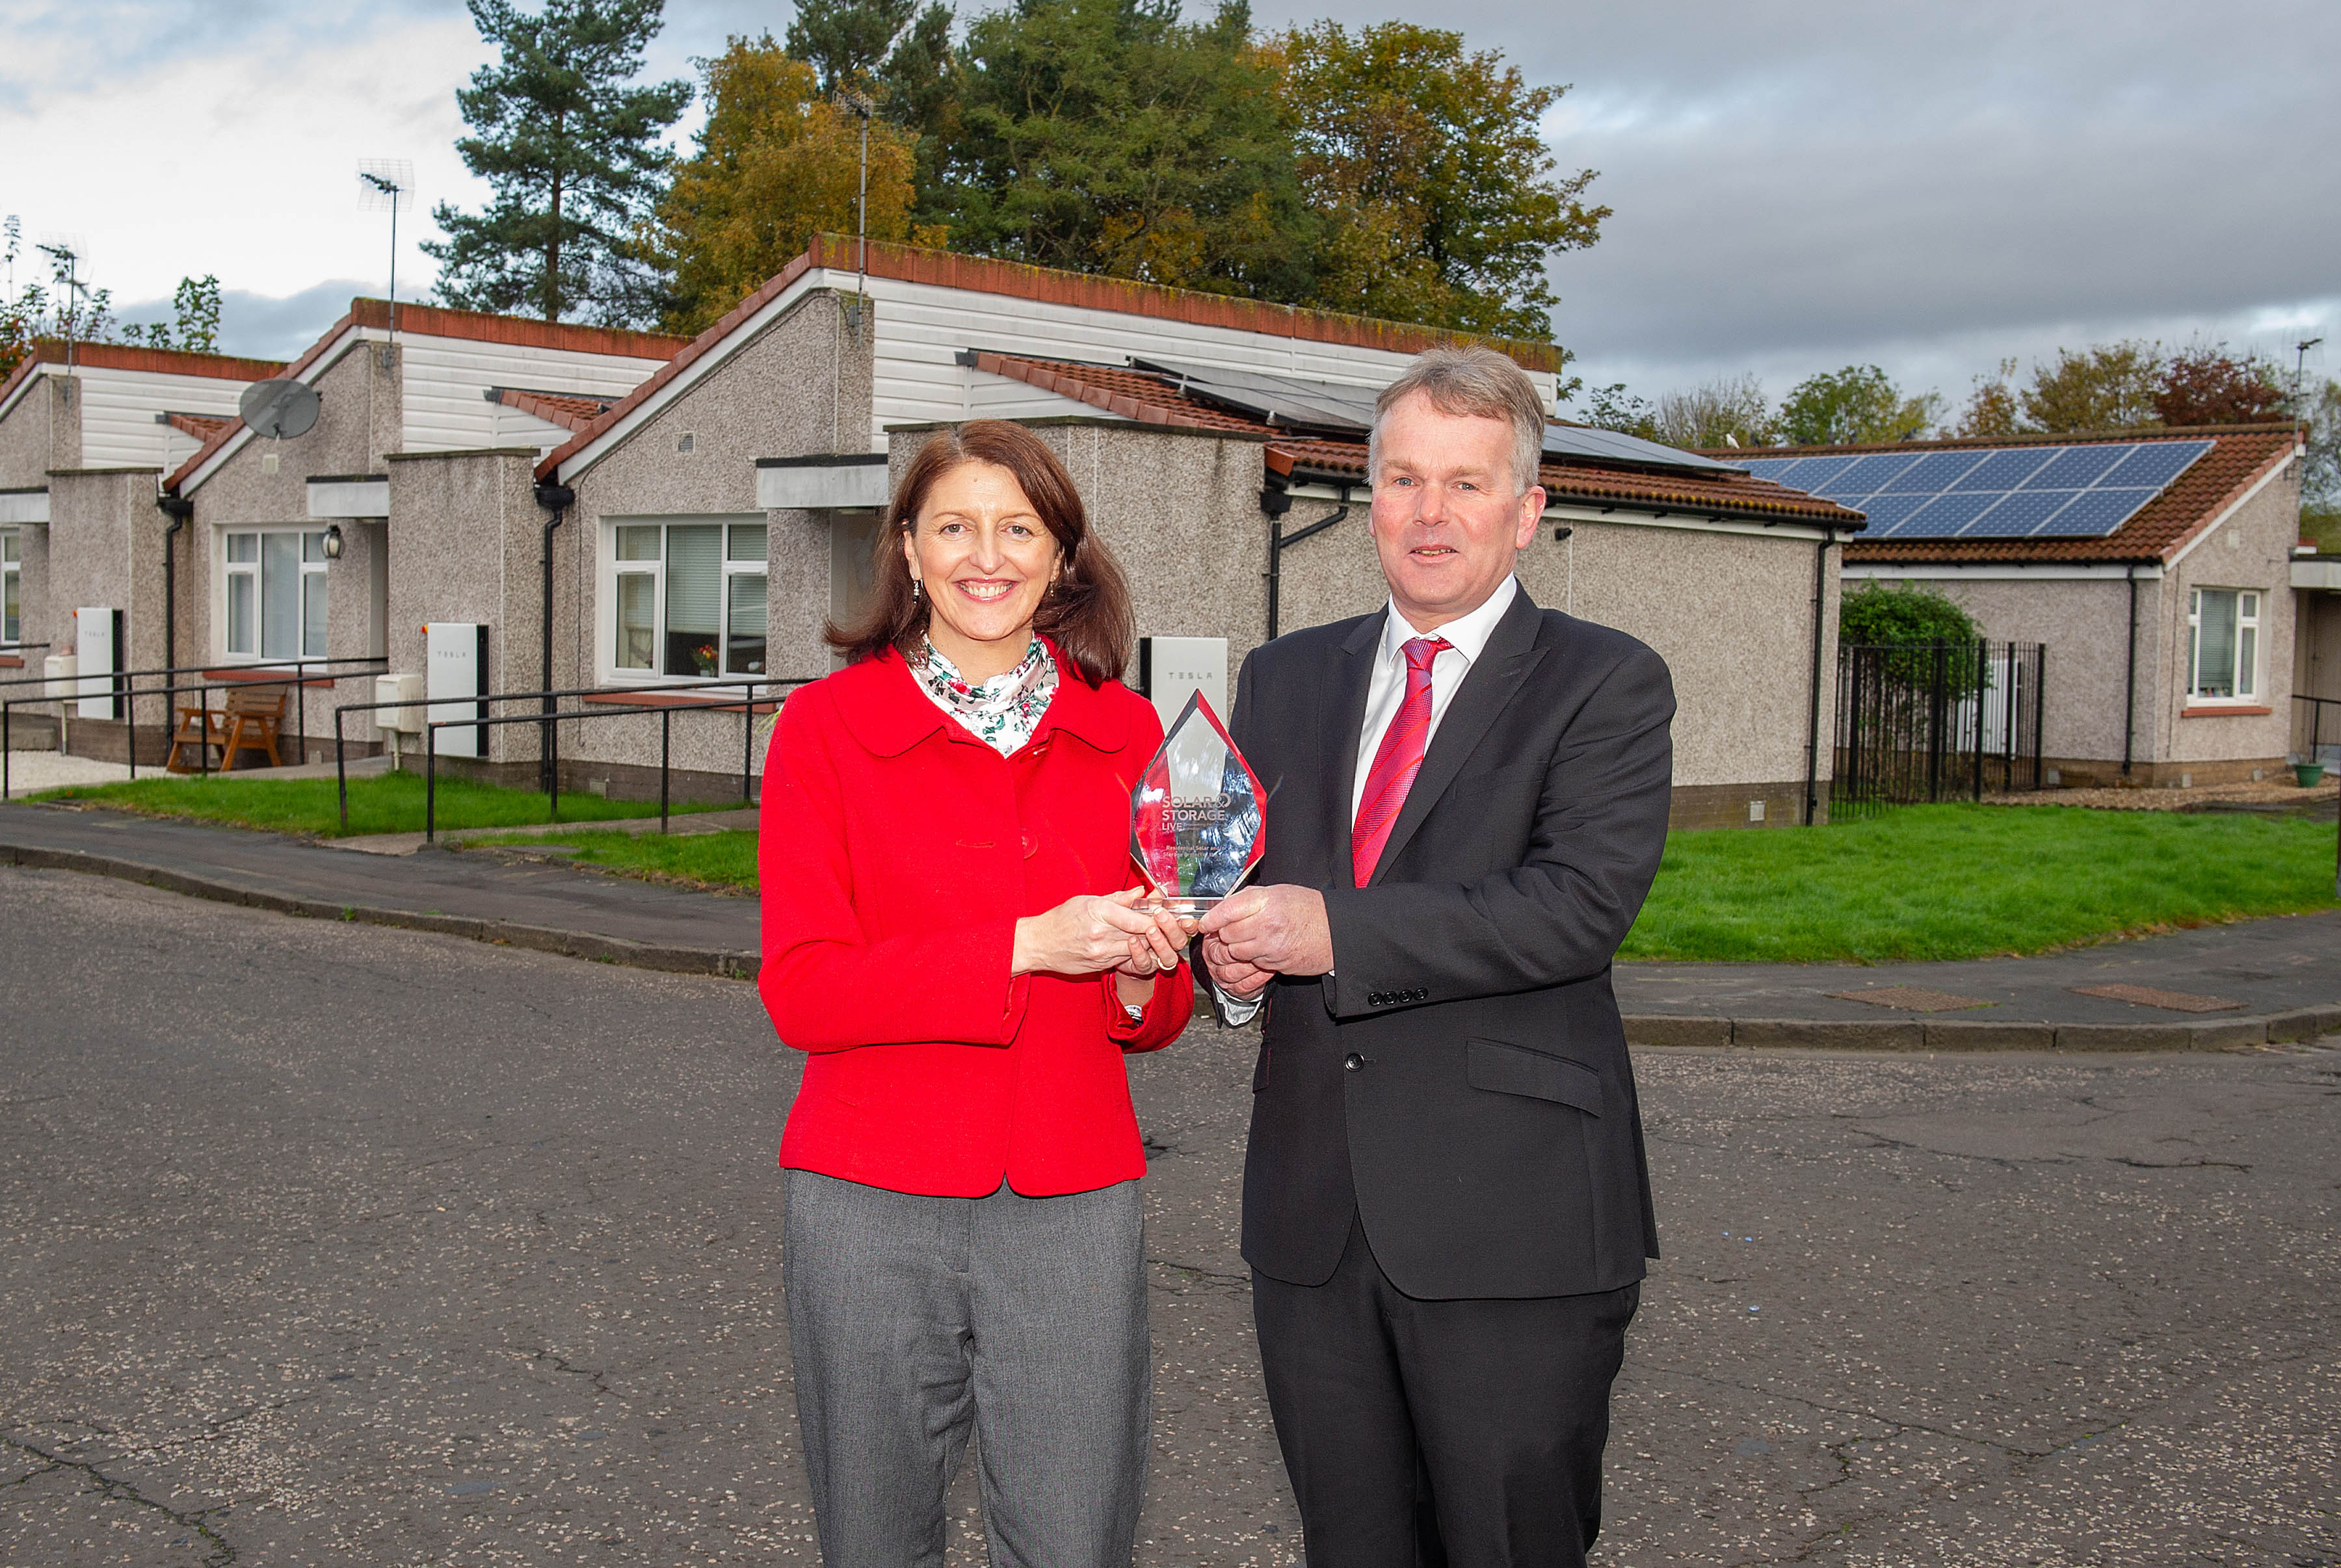 Stirling Council's housing service wins at UK Solar and Storage Awards